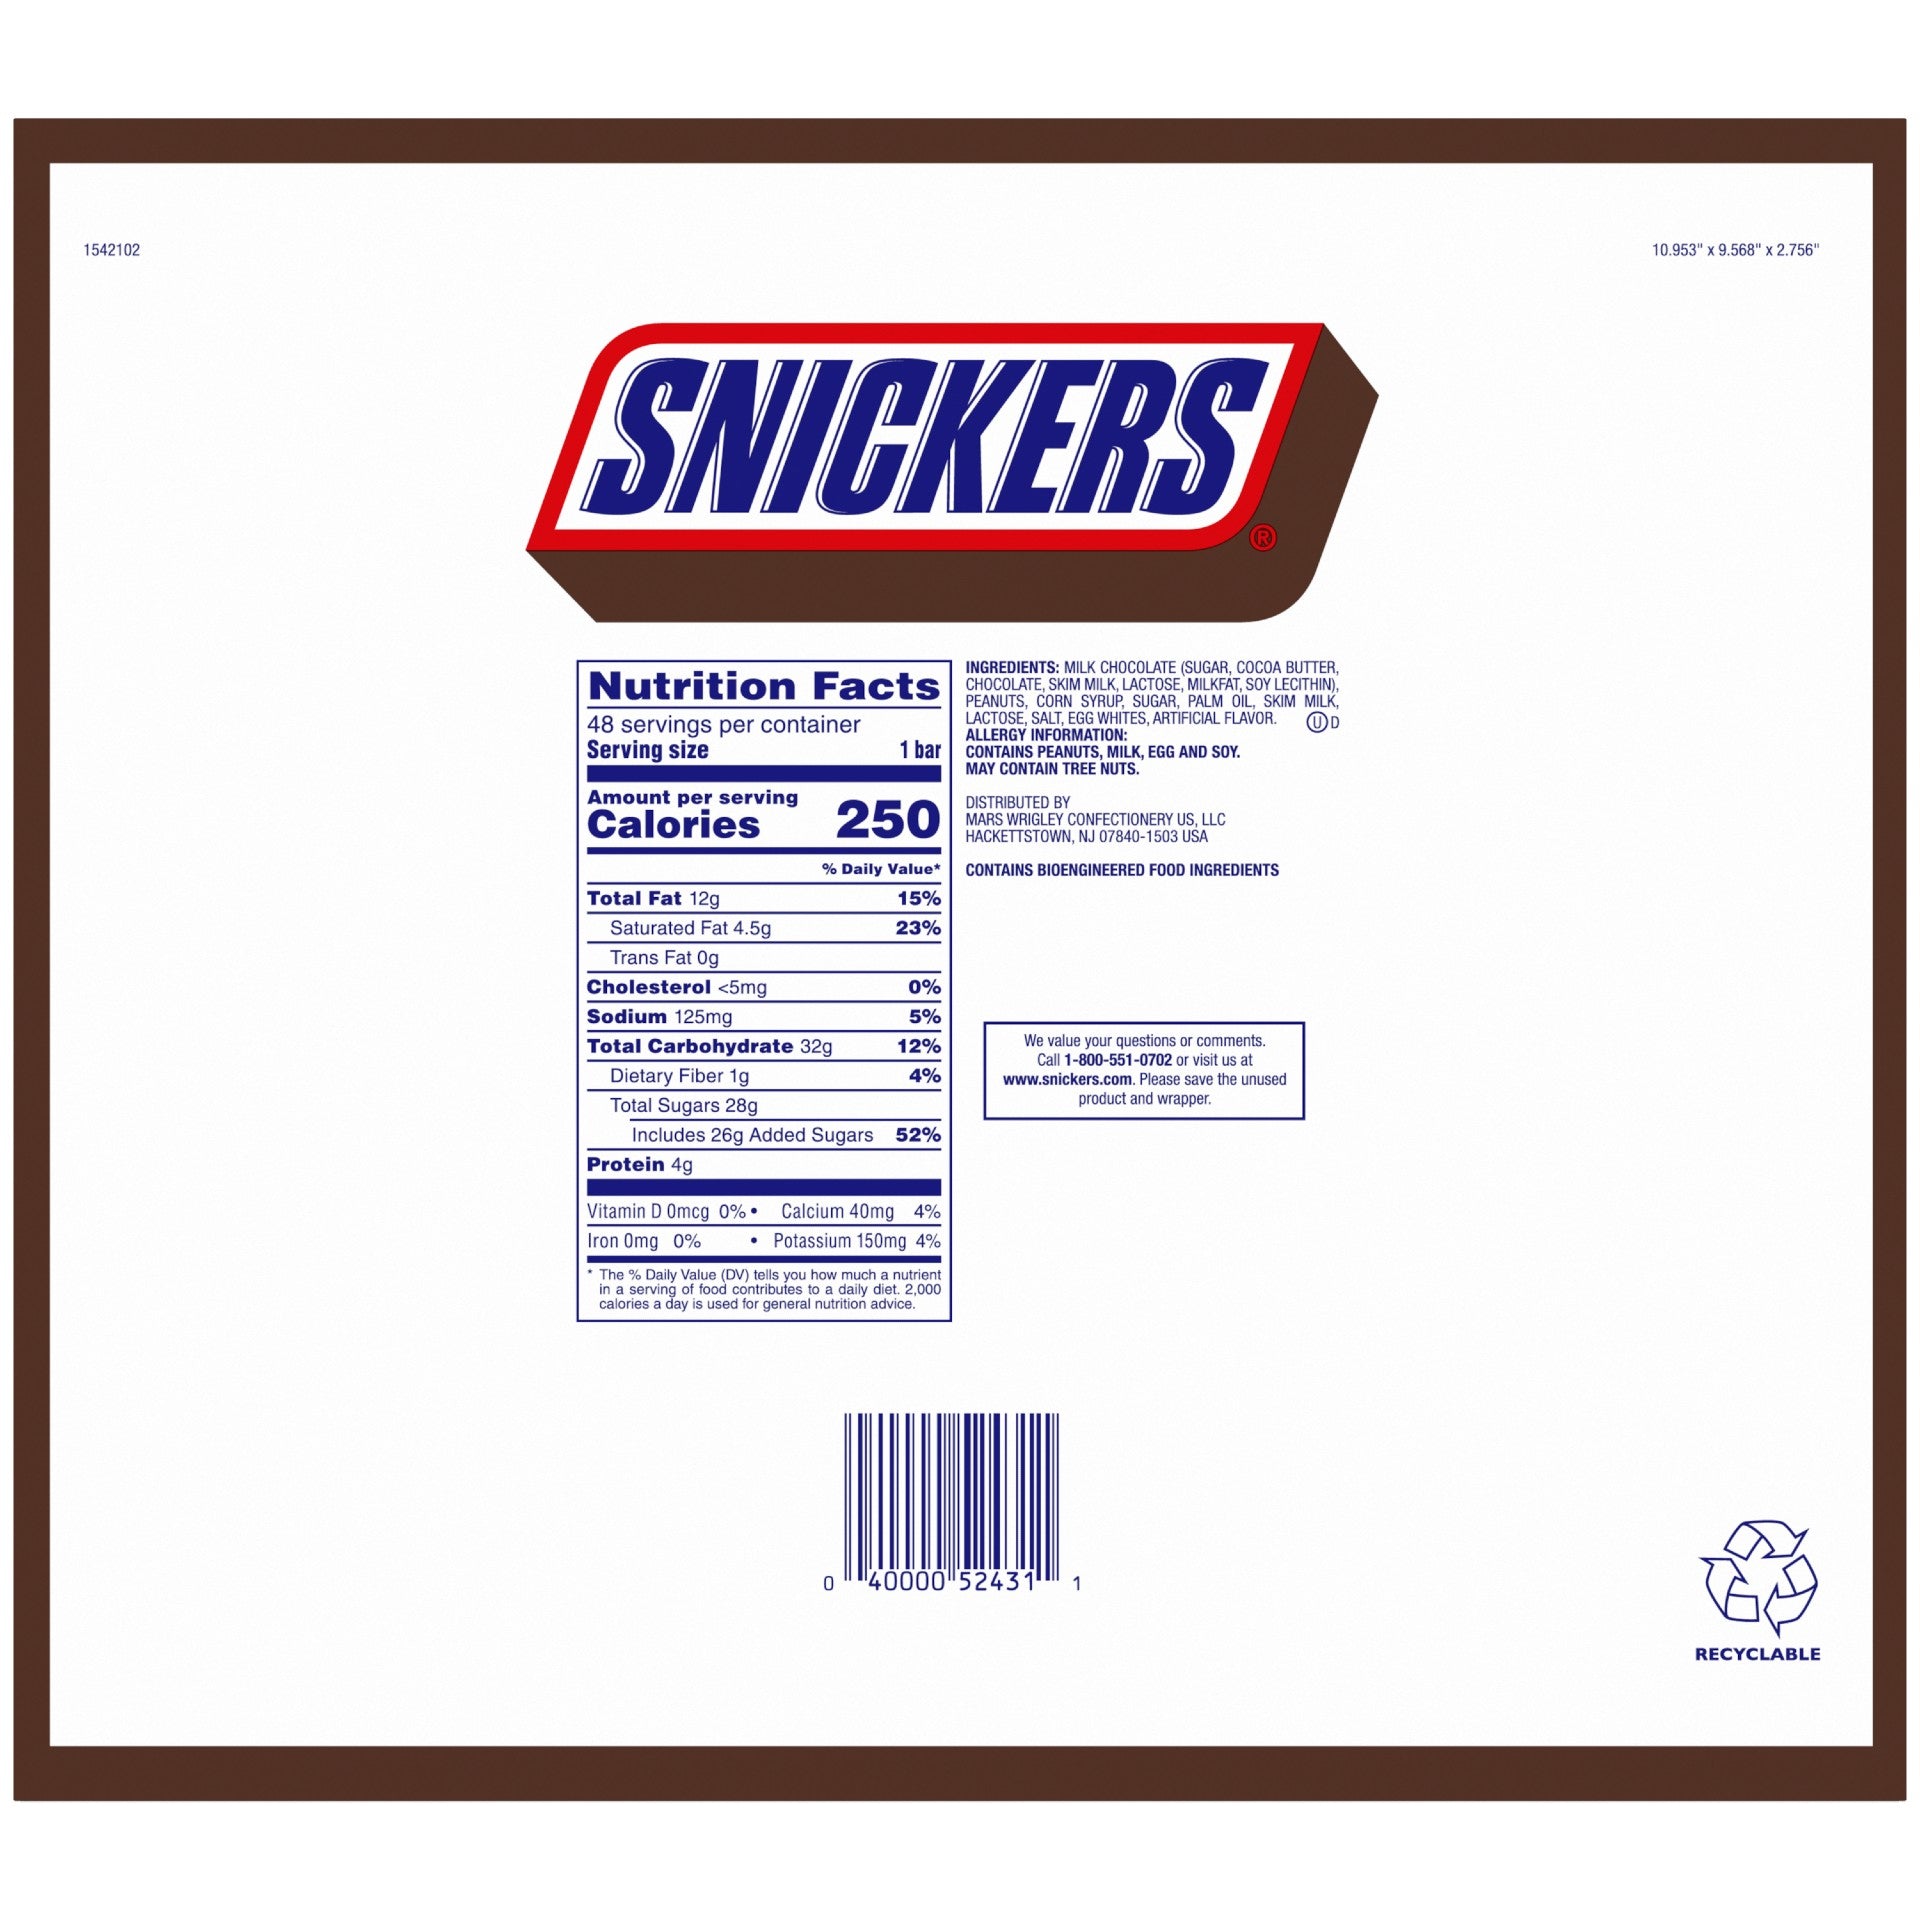 Snickers Candy Bar 1.86 oz. - All City Candy